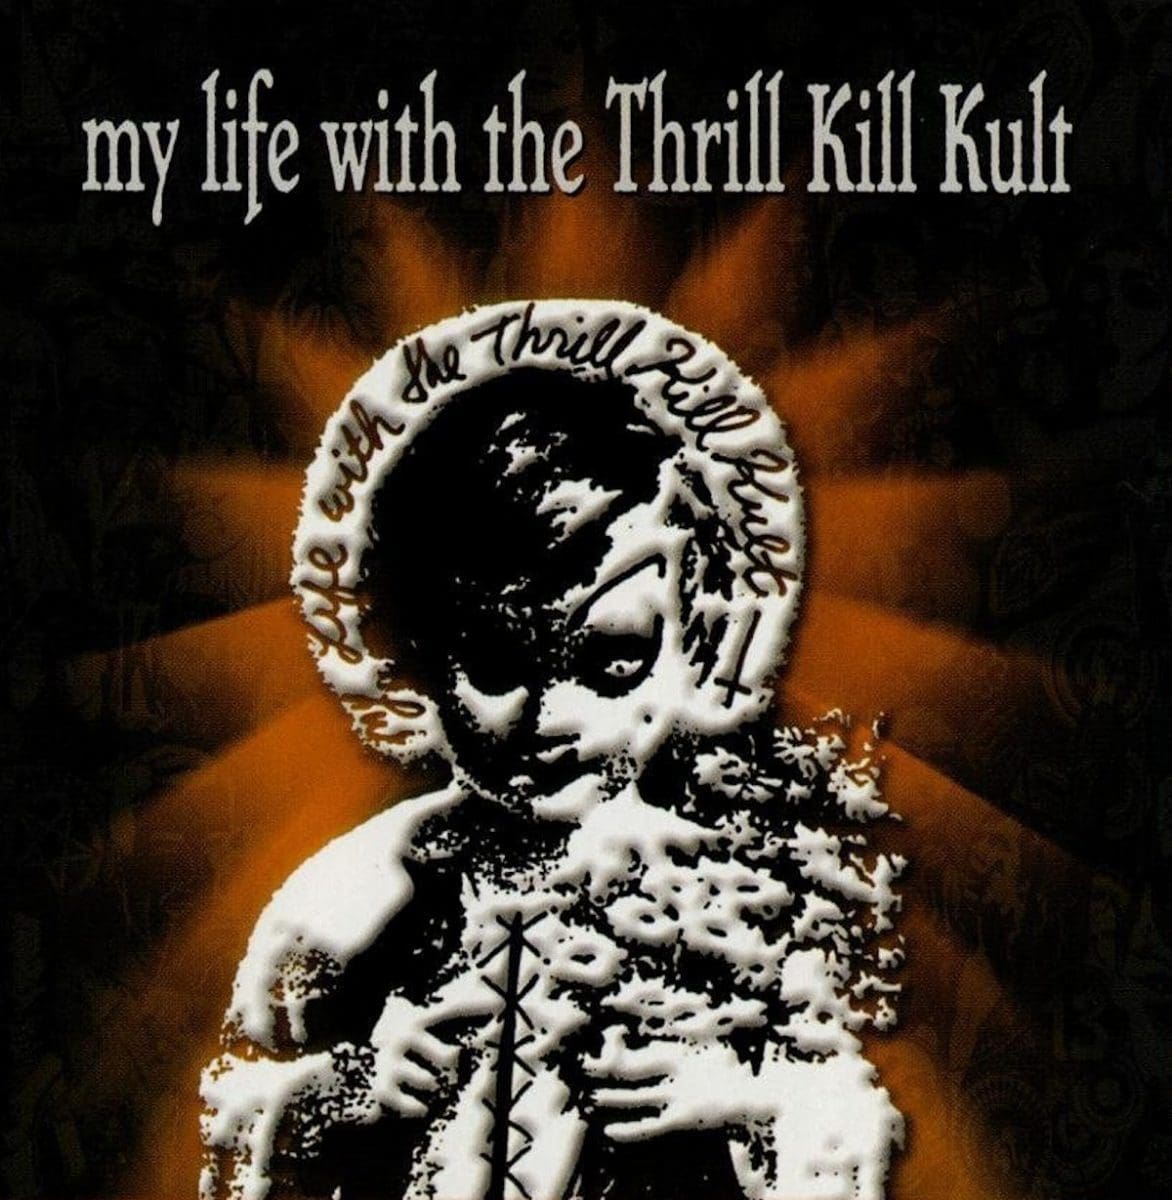 My Life With The Thrill Kill Kult announce upcoming new compilation album: 'Sleazy action'